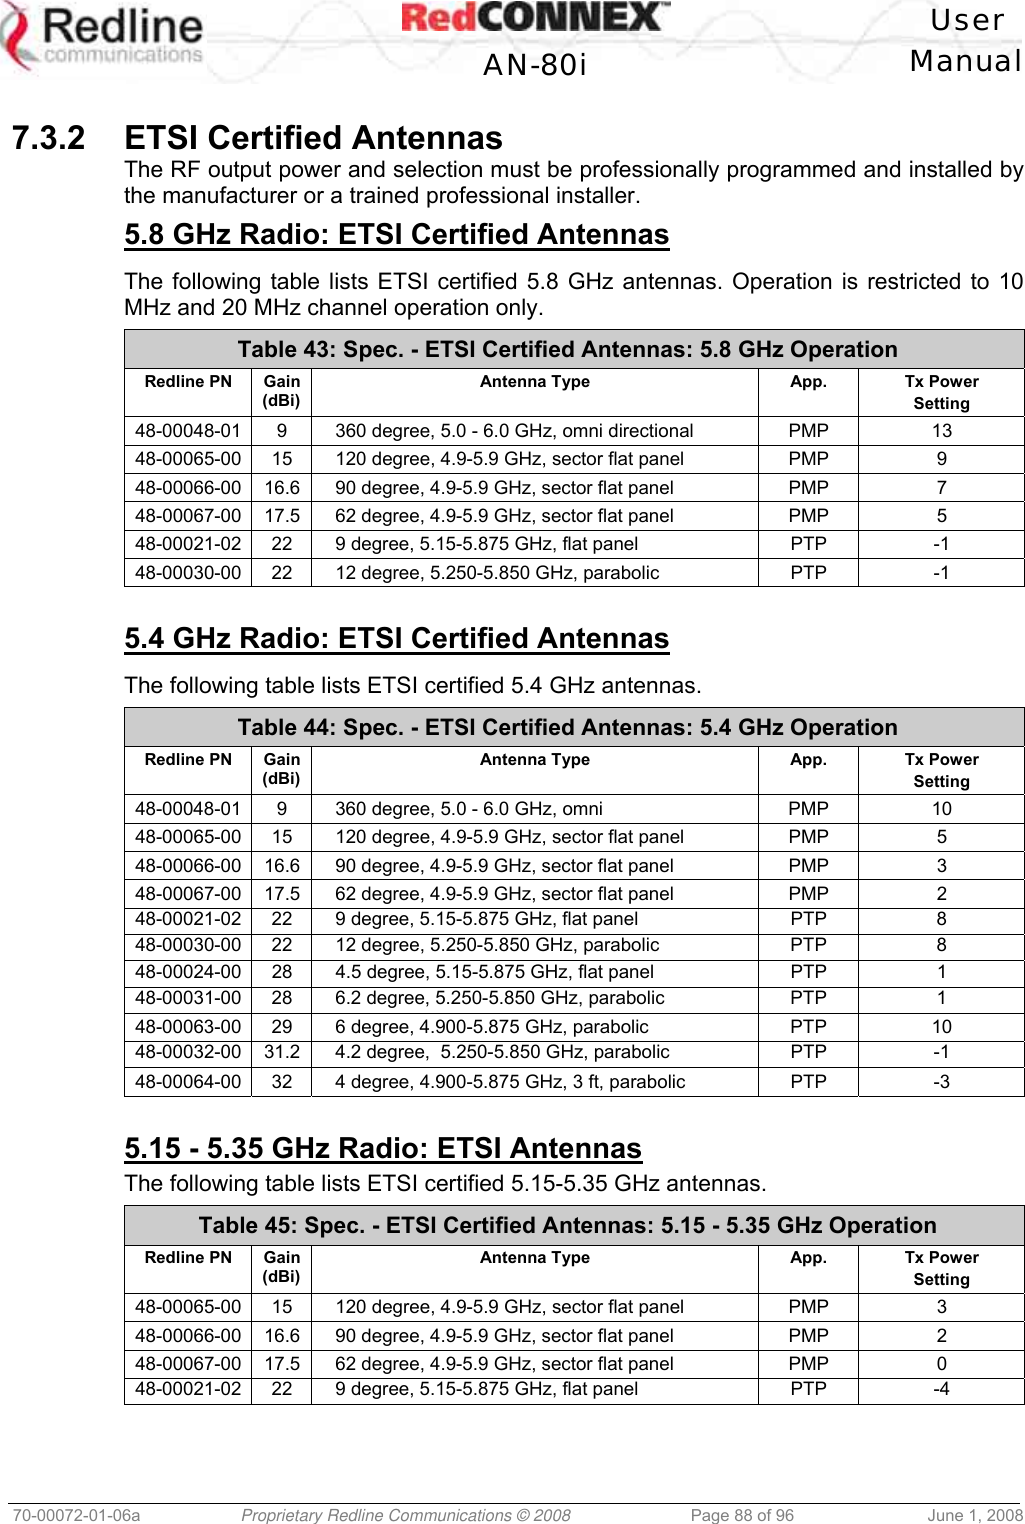   User  AN-80i Manual  70-00072-01-06a  Proprietary Redline Communications © 2008  Page 88 of 96  June 1, 2008  7.3.2  ETSI Certified Antennas The RF output power and selection must be professionally programmed and installed by the manufacturer or a trained professional installer. 5.8 GHz Radio: ETSI Certified Antennas  The following table lists ETSI certified 5.8 GHz antennas. Operation is restricted to 10 MHz and 20 MHz channel operation only. Table 43: Spec. - ETSI Certified Antennas: 5.8 GHz Operation Redline PN  Gain (dBi) Antenna Type  App.  Tx Power Setting 48-00048-01  9  360 degree, 5.0 - 6.0 GHz, omni directional  PMP  13 48-00065-00  15  120 degree, 4.9-5.9 GHz, sector flat panel  PMP  9 48-00066-00  16.6  90 degree, 4.9-5.9 GHz, sector flat panel  PMP  7 48-00067-00  17.5  62 degree, 4.9-5.9 GHz, sector flat panel  PMP  5 48-00021-02  22  9 degree, 5.15-5.875 GHz, flat panel  PTP  -1 48-00030-00  22  12 degree, 5.250-5.850 GHz, parabolic  PTP  -1  5.4 GHz Radio: ETSI Certified Antennas  The following table lists ETSI certified 5.4 GHz antennas. Table 44: Spec. - ETSI Certified Antennas: 5.4 GHz Operation Redline PN  Gain (dBi) Antenna Type  App.  Tx Power Setting 48-00048-01  9  360 degree, 5.0 - 6.0 GHz, omni  PMP  10 48-00065-00  15  120 degree, 4.9-5.9 GHz, sector flat panel  PMP  5 48-00066-00  16.6  90 degree, 4.9-5.9 GHz, sector flat panel  PMP  3 48-00067-00  17.5  62 degree, 4.9-5.9 GHz, sector flat panel  PMP  2 48-00021-02  22  9 degree, 5.15-5.875 GHz, flat panel  PTP  8 48-00030-00  22  12 degree, 5.250-5.850 GHz, parabolic  PTP  8 48-00024-00  28  4.5 degree, 5.15-5.875 GHz, flat panel  PTP  1 48-00031-00  28  6.2 degree, 5.250-5.850 GHz, parabolic  PTP  1 48-00063-00  29  6 degree, 4.900-5.875 GHz, parabolic  PTP  10 48-00032-00  31.2  4.2 degree,  5.250-5.850 GHz, parabolic  PTP  -1 48-00064-00  32  4 degree, 4.900-5.875 GHz, 3 ft, parabolic  PTP  -3  5.15 - 5.35 GHz Radio: ETSI Antennas The following table lists ETSI certified 5.15-5.35 GHz antennas. Table 45: Spec. - ETSI Certified Antennas: 5.15 - 5.35 GHz Operation Redline PN  Gain (dBi) Antenna Type  App.  Tx Power Setting 48-00065-00  15  120 degree, 4.9-5.9 GHz, sector flat panel  PMP  3 48-00066-00  16.6  90 degree, 4.9-5.9 GHz, sector flat panel  PMP  2 48-00067-00  17.5  62 degree, 4.9-5.9 GHz, sector flat panel  PMP  0 48-00021-02  22  9 degree, 5.15-5.875 GHz, flat panel  PTP  -4  